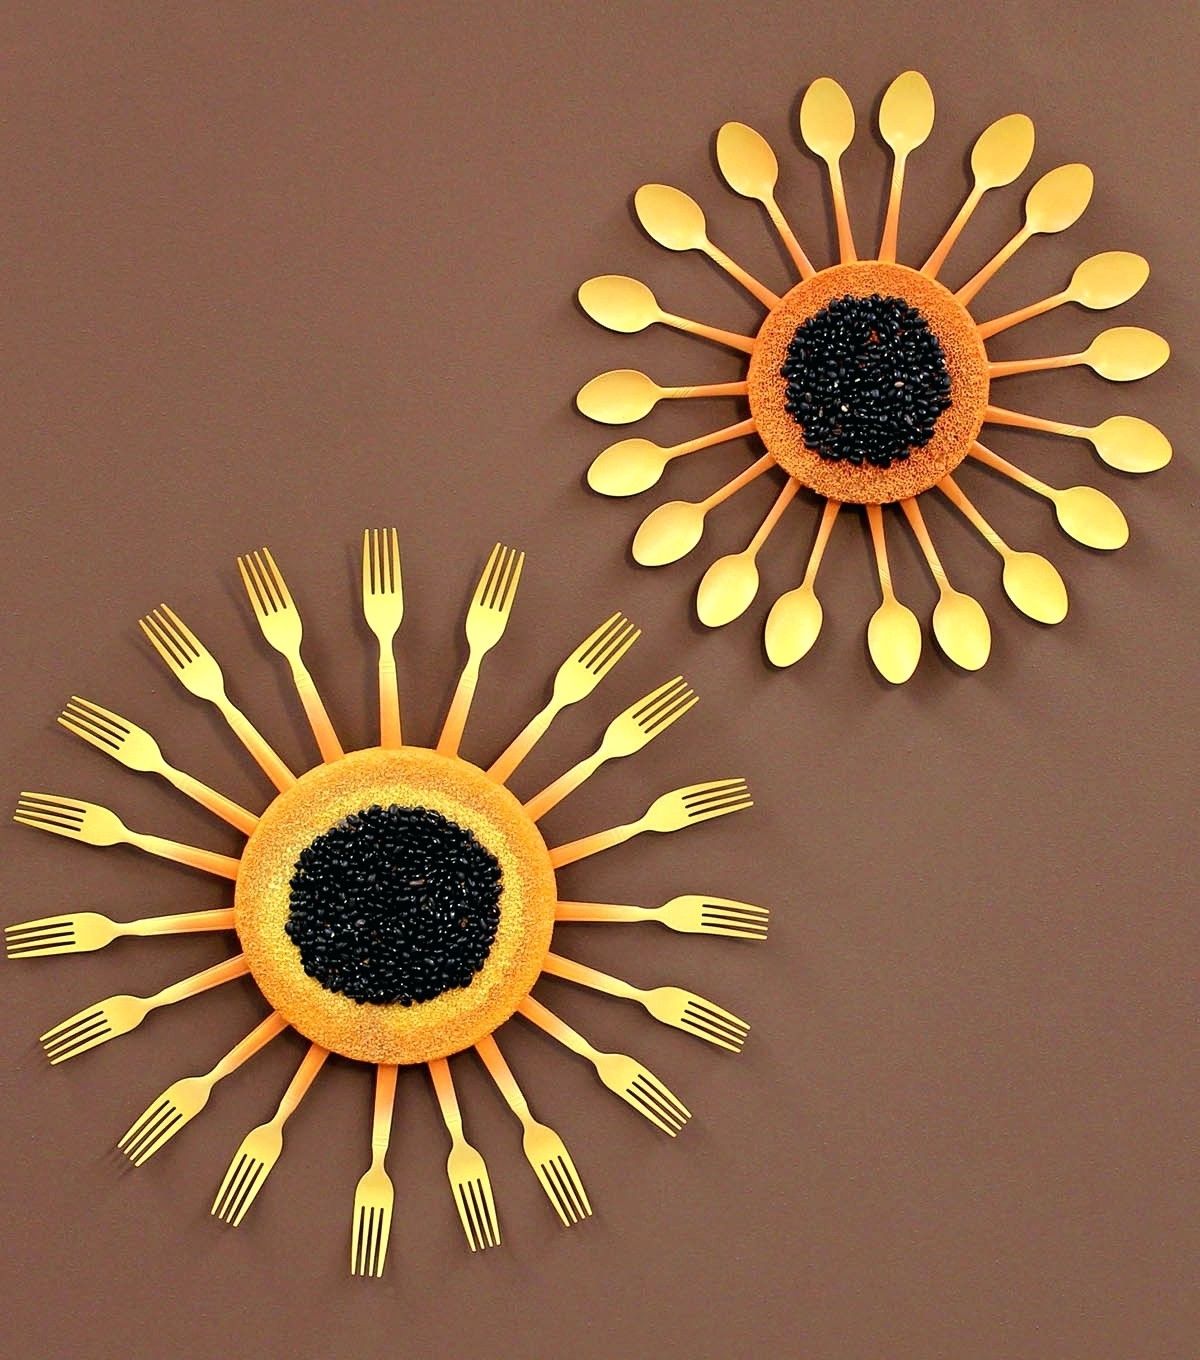 Metal Sunflower Images On Sunflower Wall Art – Prix Dalle Beton Within Recent Sunflower Wall Art (View 17 of 20)